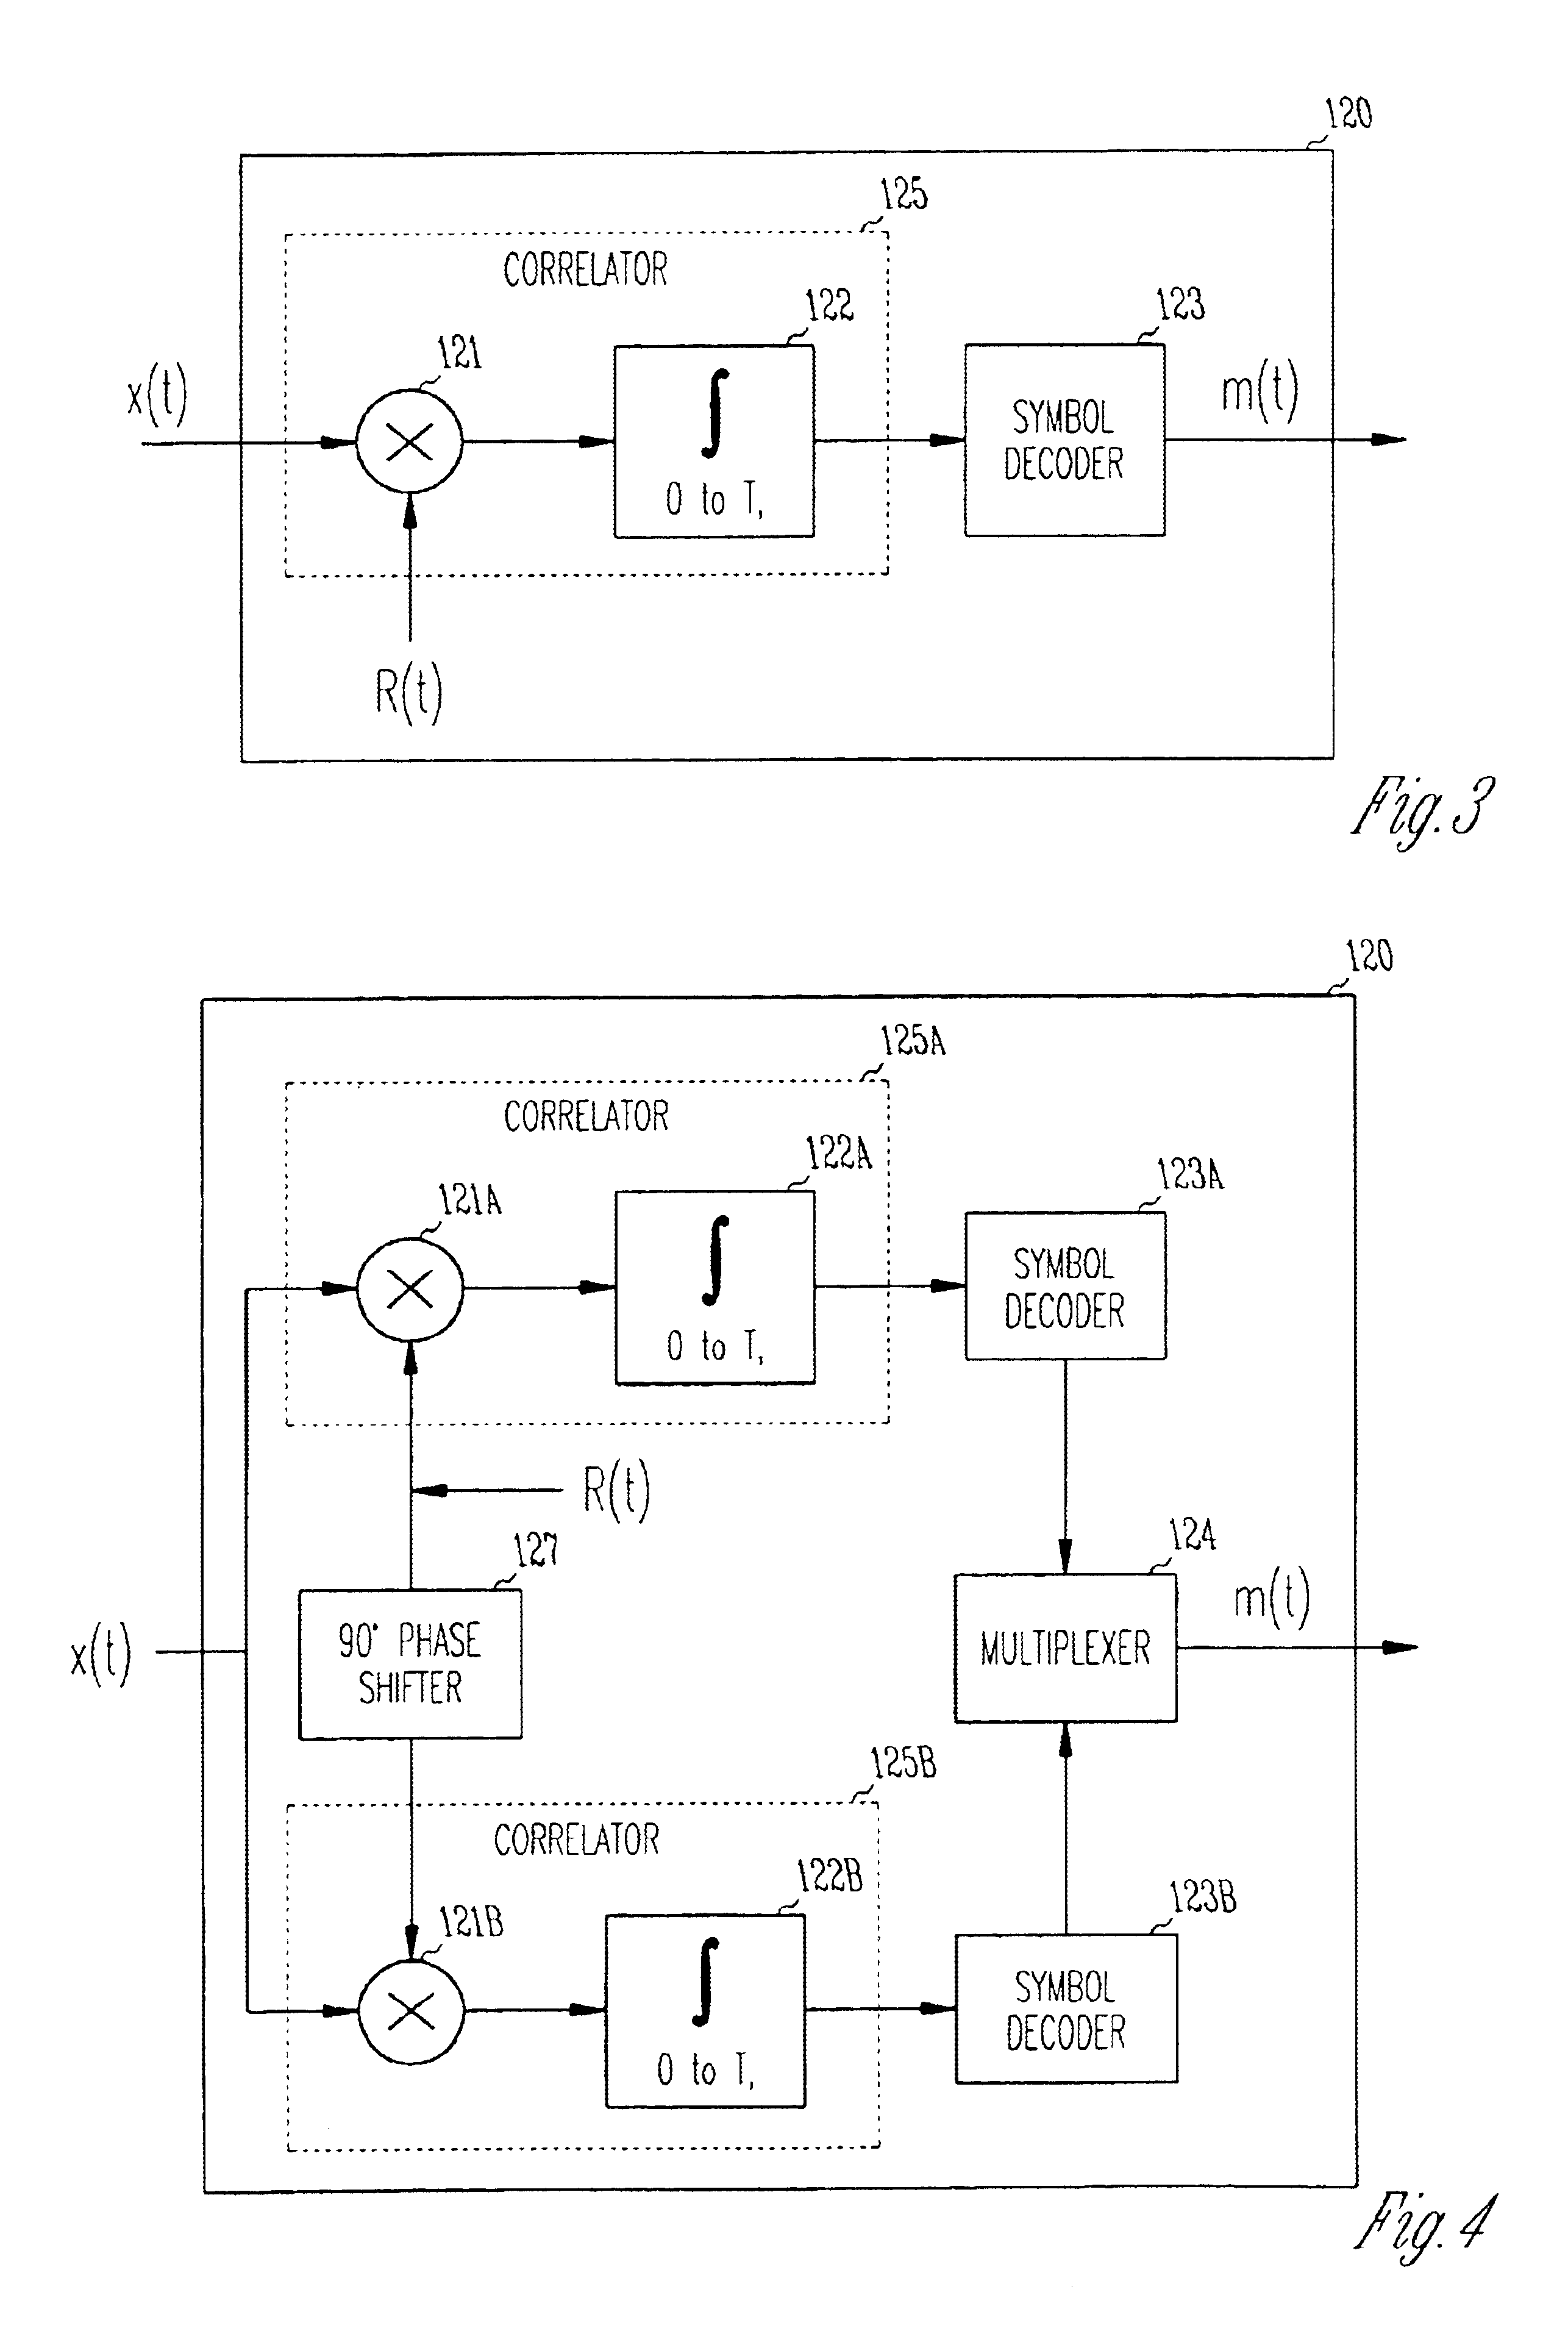 Passive telemetry system for implantable medical device